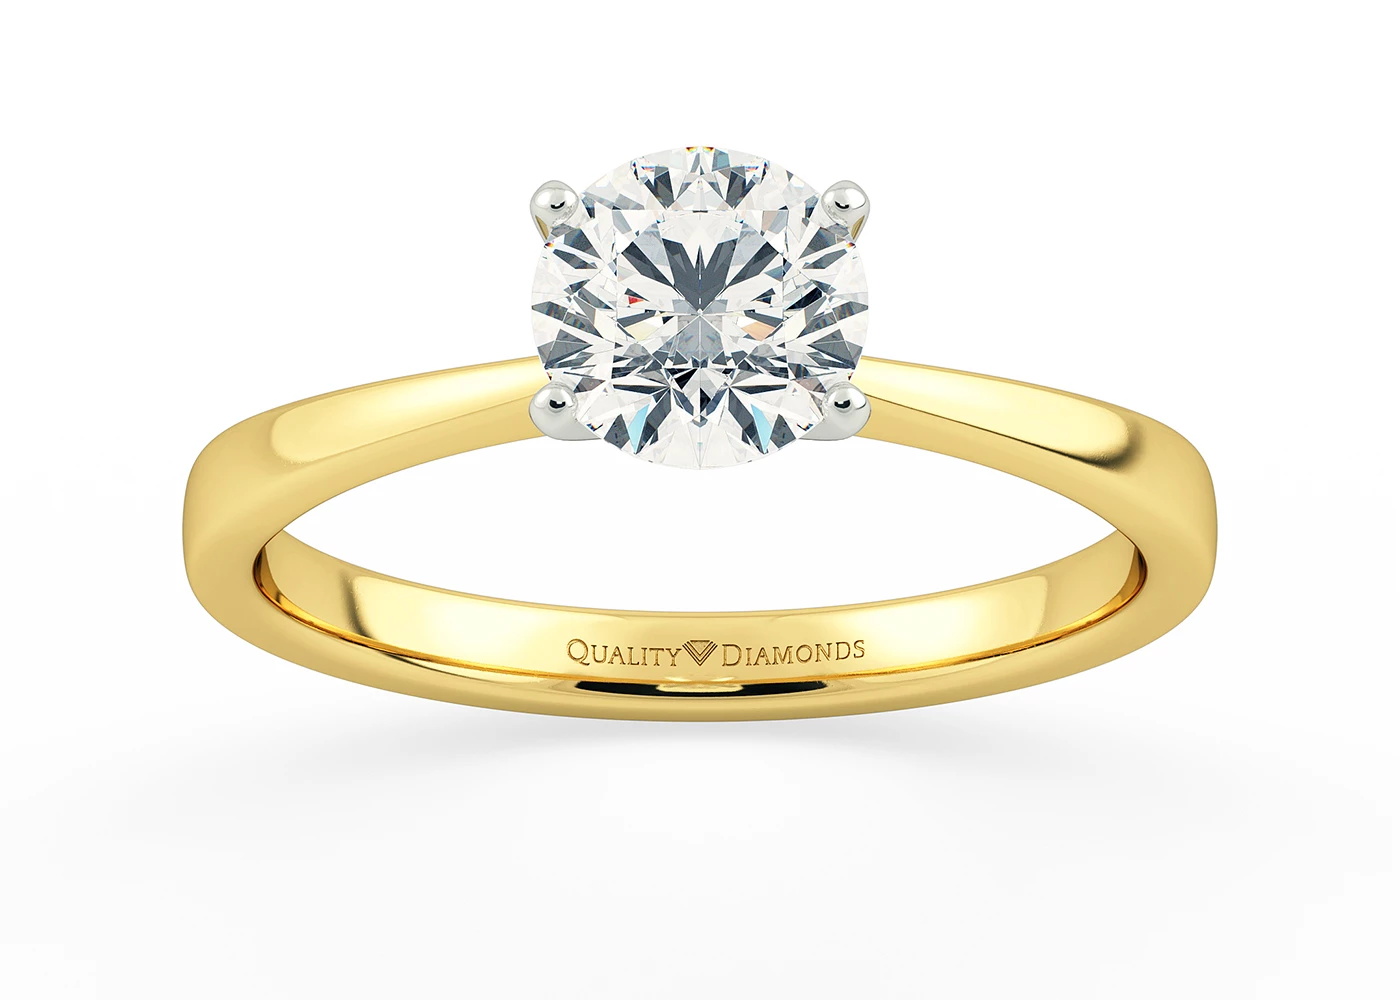 Round Brilliant Amabelle Diamond Ring in 18K Yellow Gold